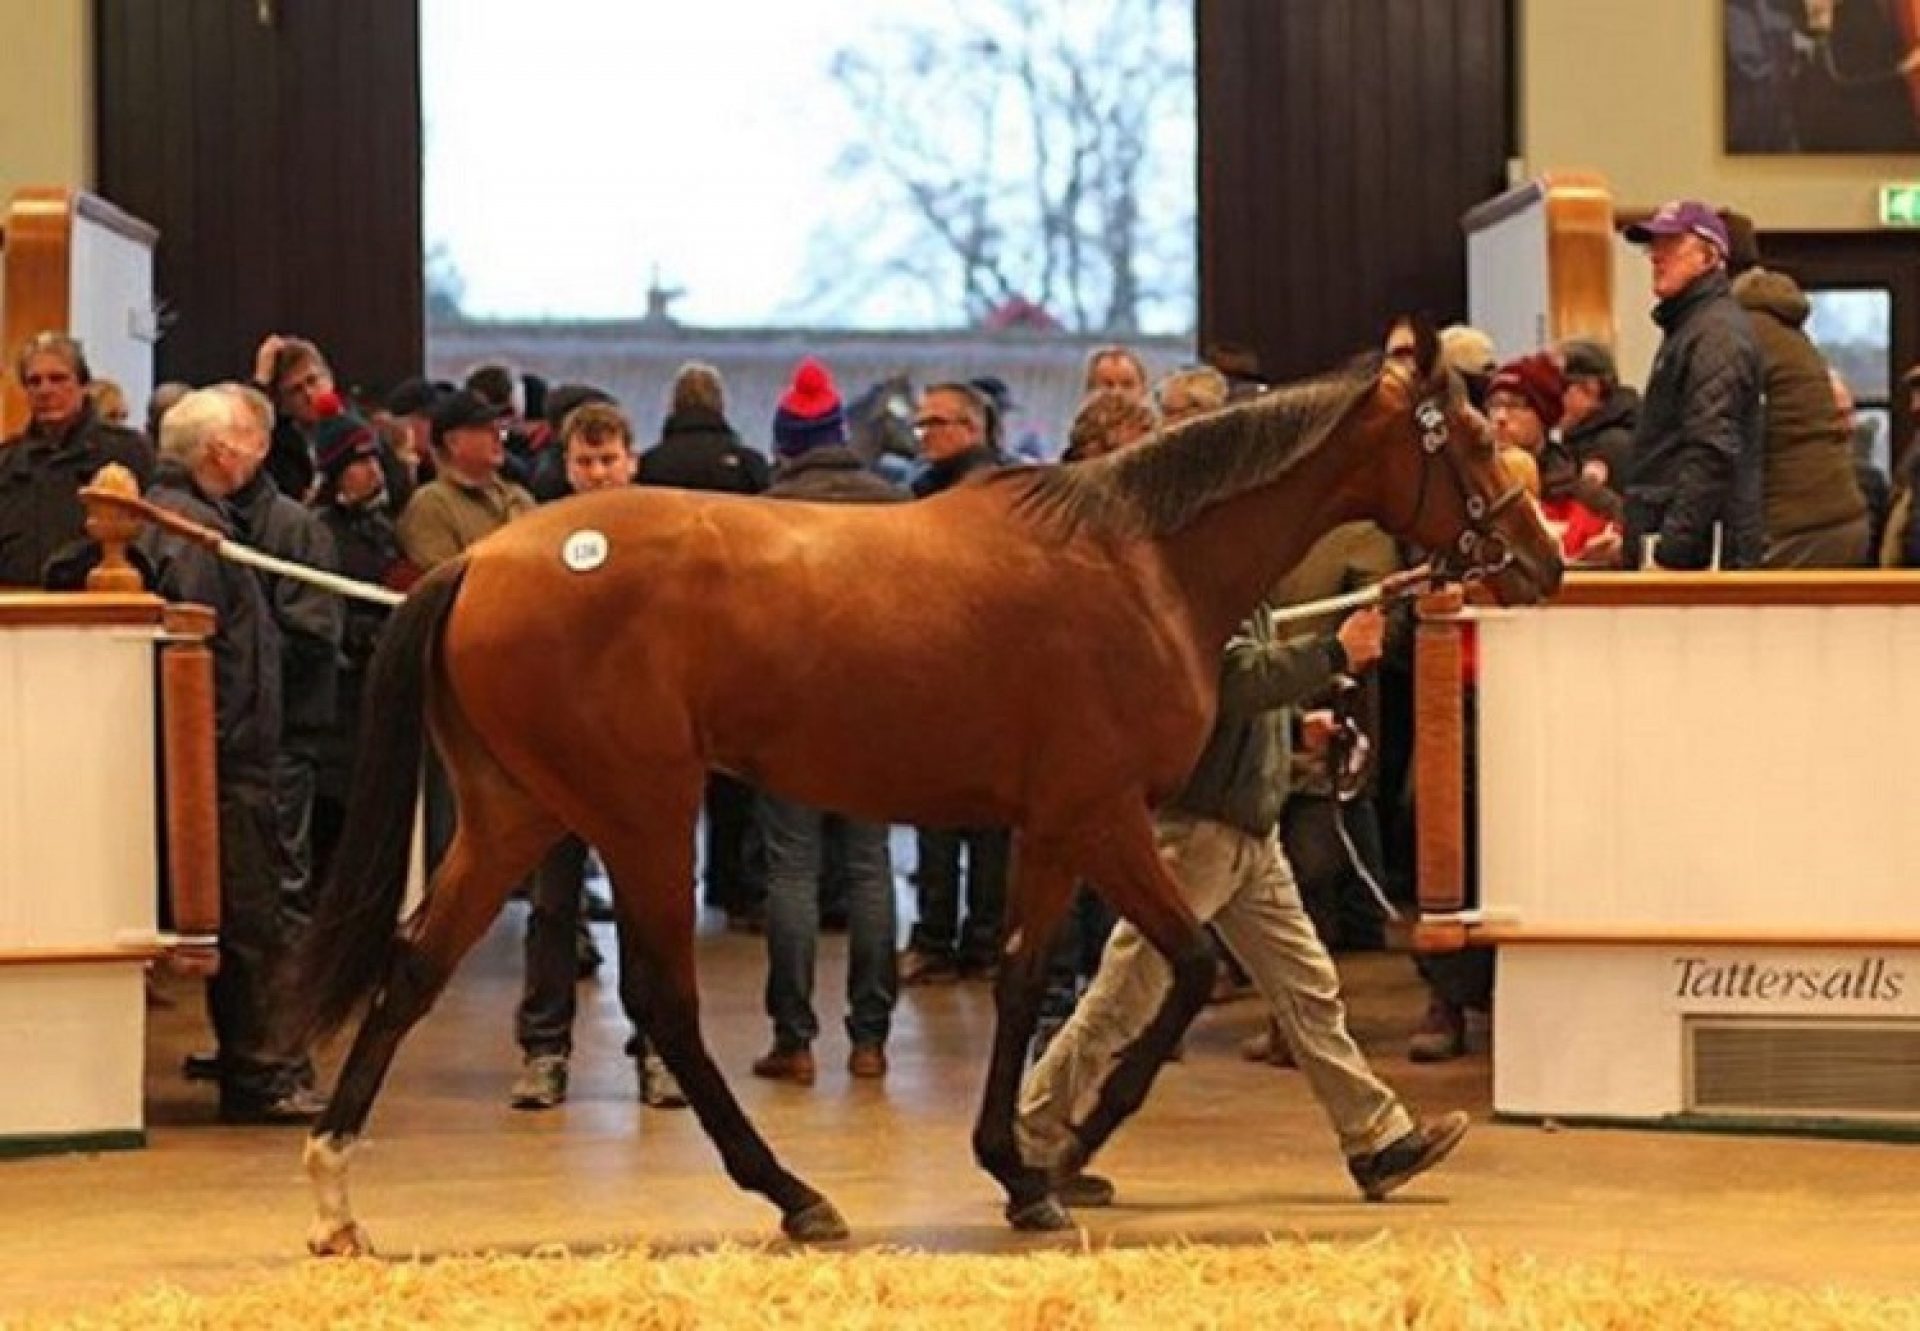 Australia Colt ex Sweepstake selling for 150,000gns at Newmarket